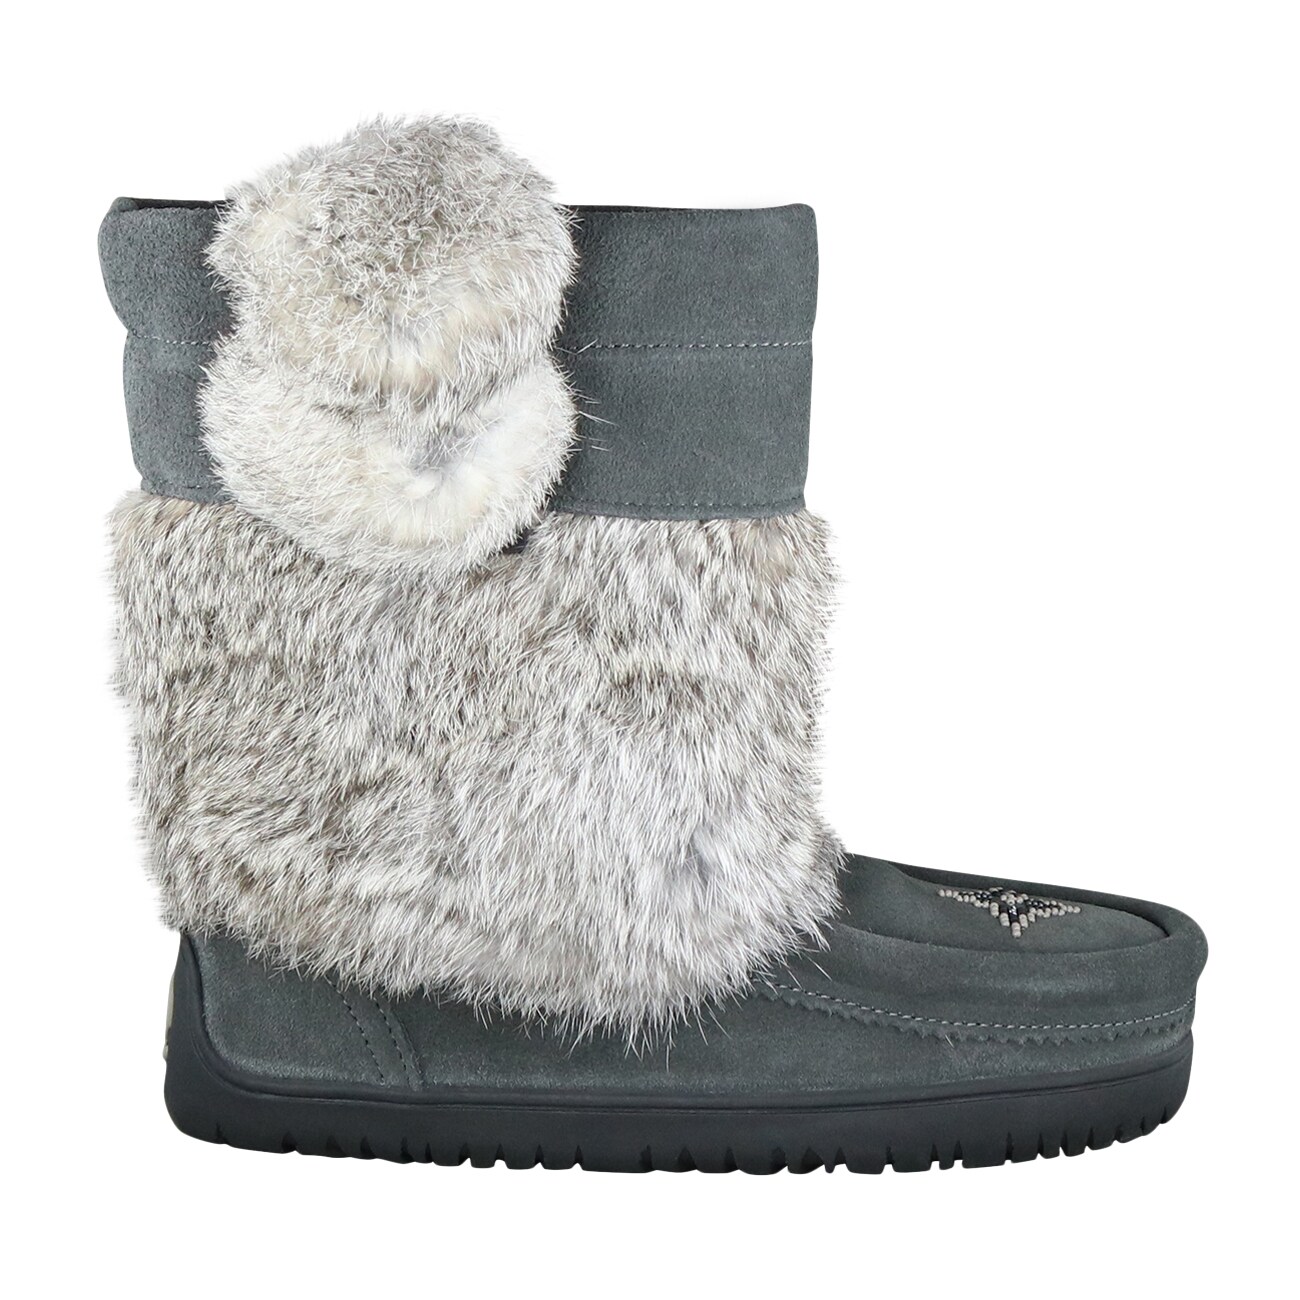 Manitobah Mukluks Online Only Waterproof Short Snowy Owl Winter Boot | The Shoe Company